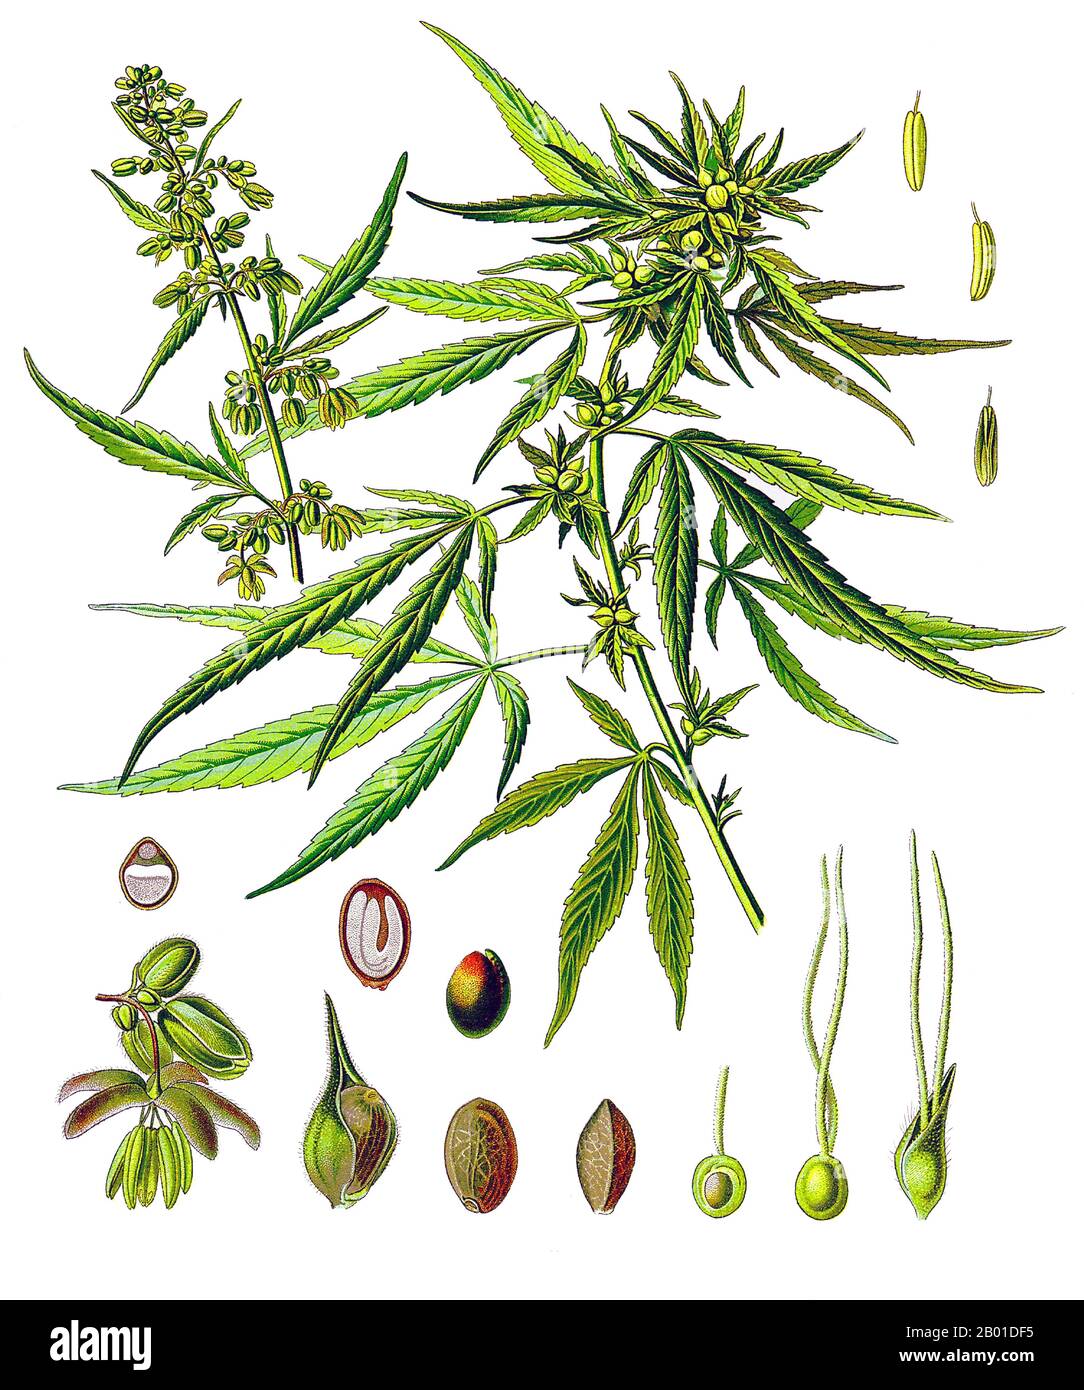 Central Asia/South Asia: Cannabis or Common Hemp in a 19th century botanical painting. Illustration by Walther Otto Muller (1833-1887) for Kohler's 'Medizinal-Pflanzen', 1887.  Cannabis is a genus of flowering plants that includes three putative species, Cannabis sativa, Cannabis indica, and Cannabis ruderalis. These three taxa are indigenous to Central Asia, and South Asia.  Cannabis has long been used for fibre (hemp), for seed and seed oils, for medicinal purposes and as a recreational drug. Industrial hemp products are made from Cannabis plants selected to produce an abundance of fibre. Stock Photo